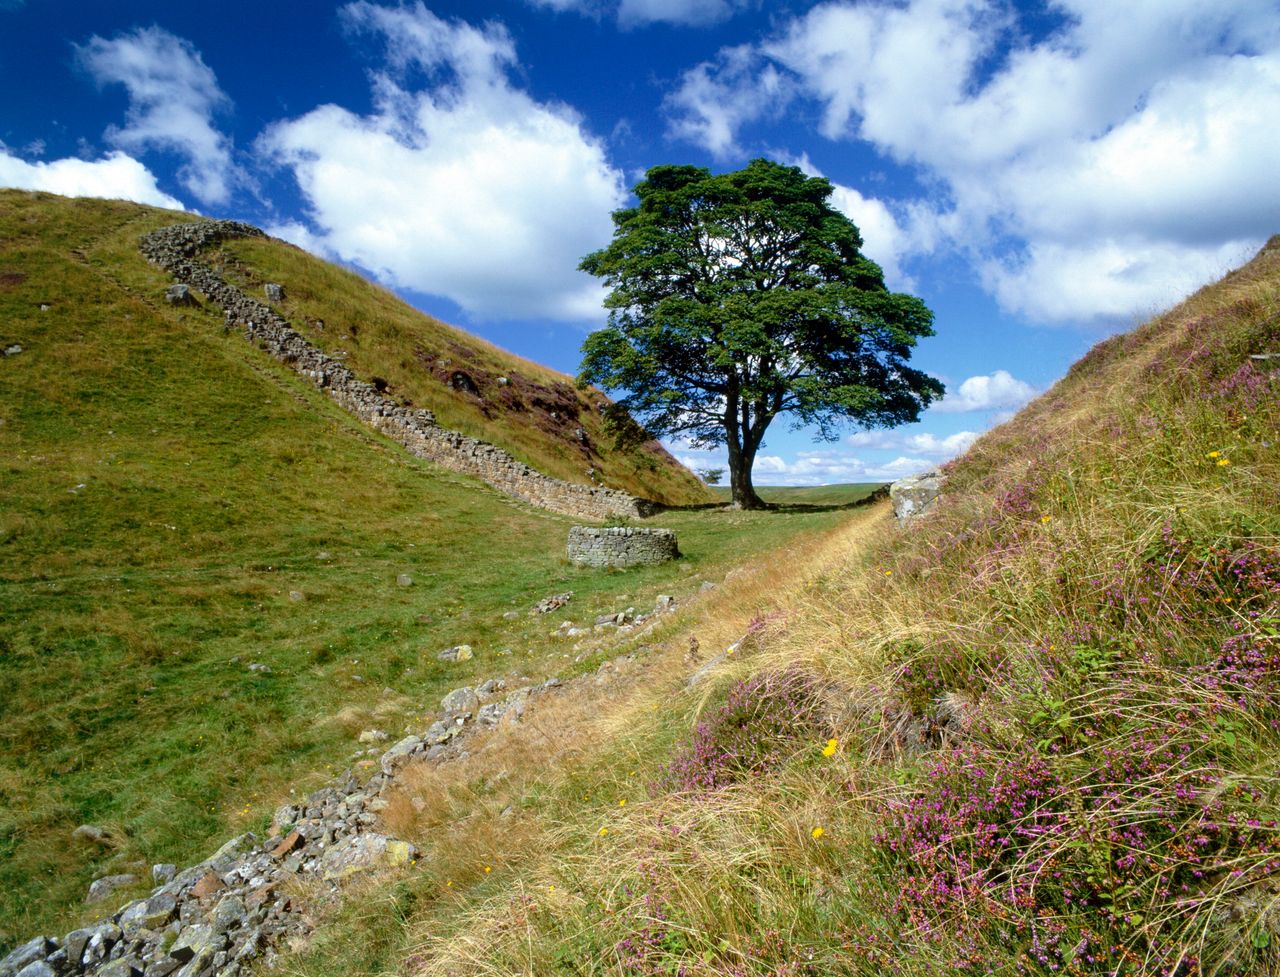 Sycamore Gap, near Steel Rigg, Hadrian's Wall, Northumberland, 2010. The site was used as a location in the making of the film Robin Hood Prince of Thieves. Artist Graeme Peacock.